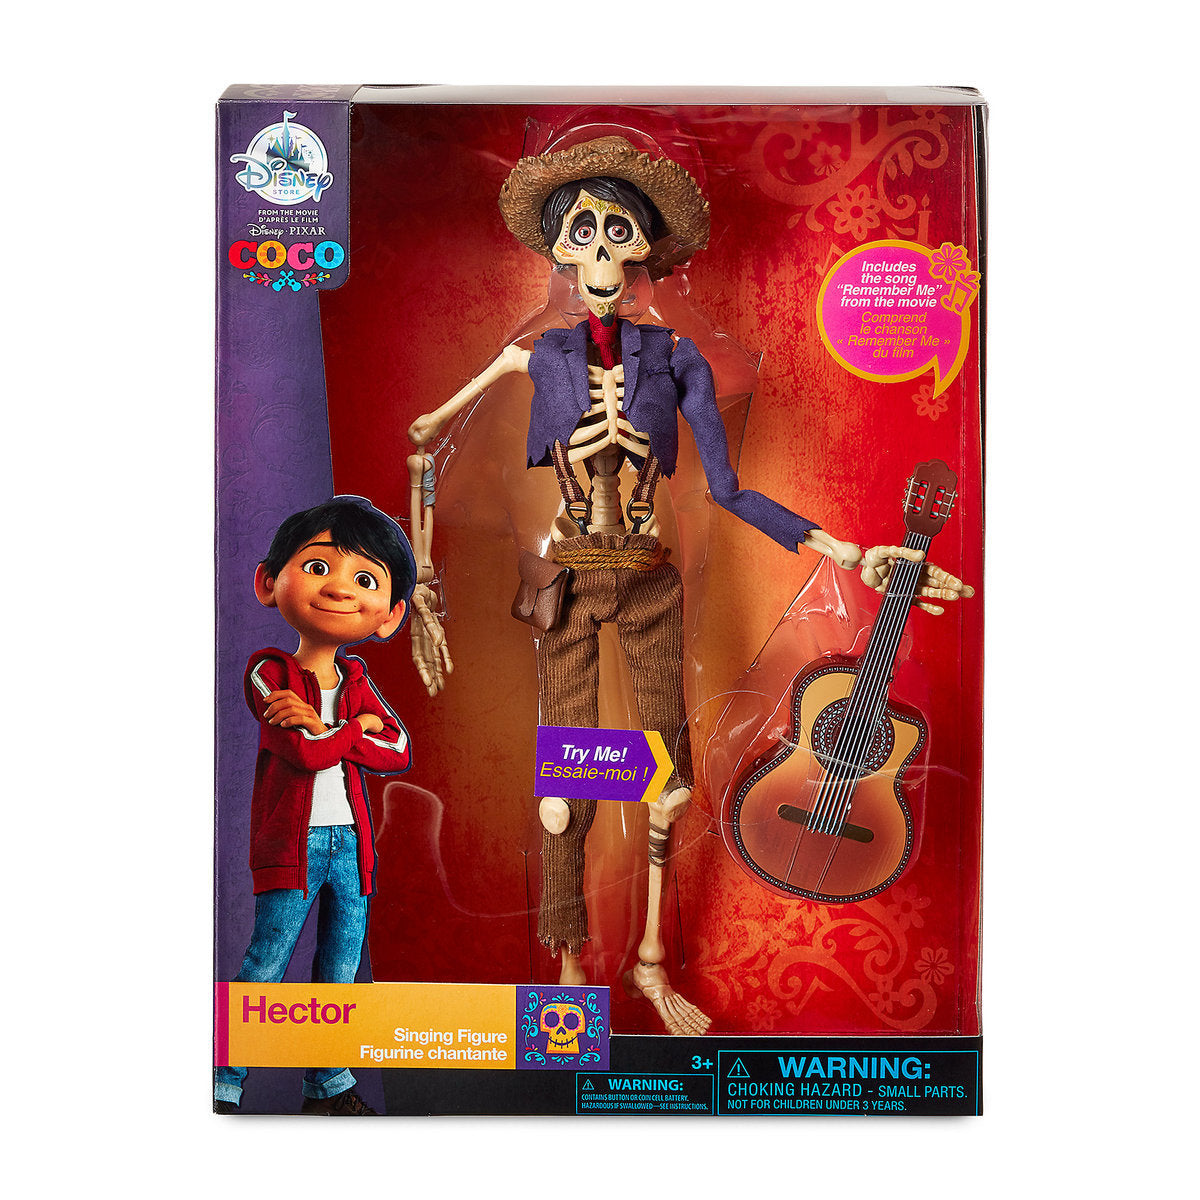 Disney Pixar Coco Hector Singing Figure New with Box – I Love Characters